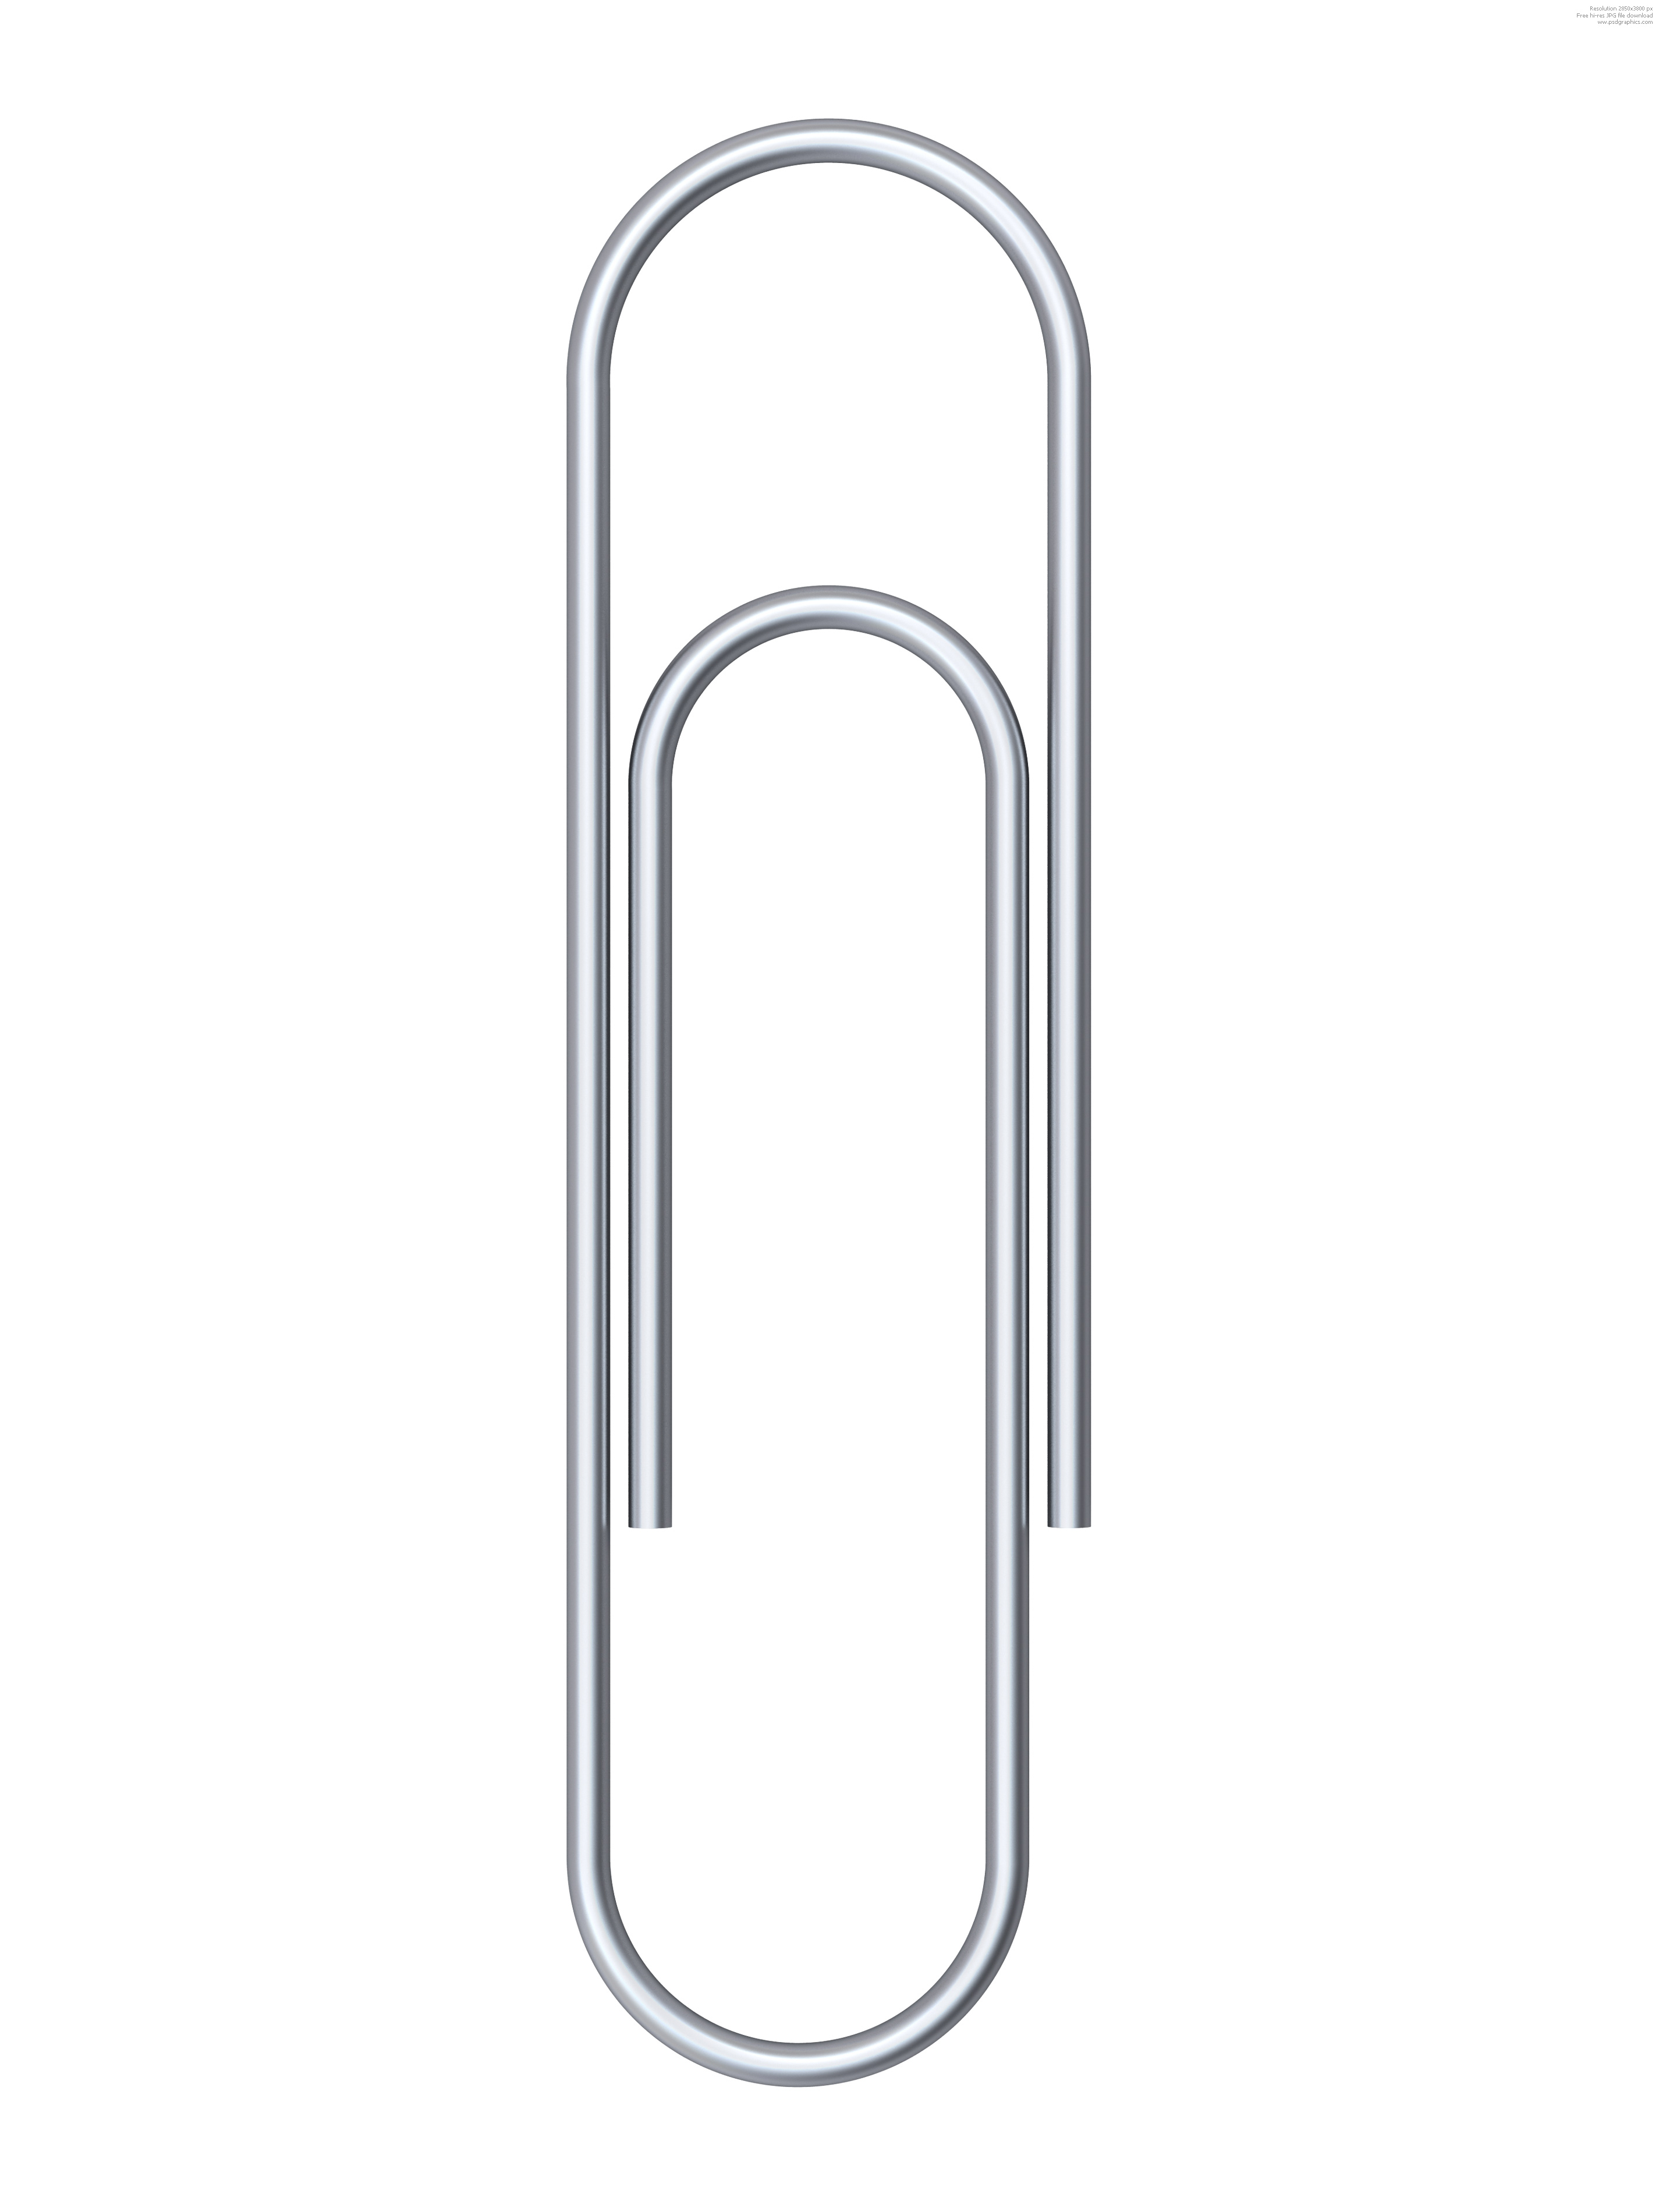 Paper Clip PNG Free - 163668